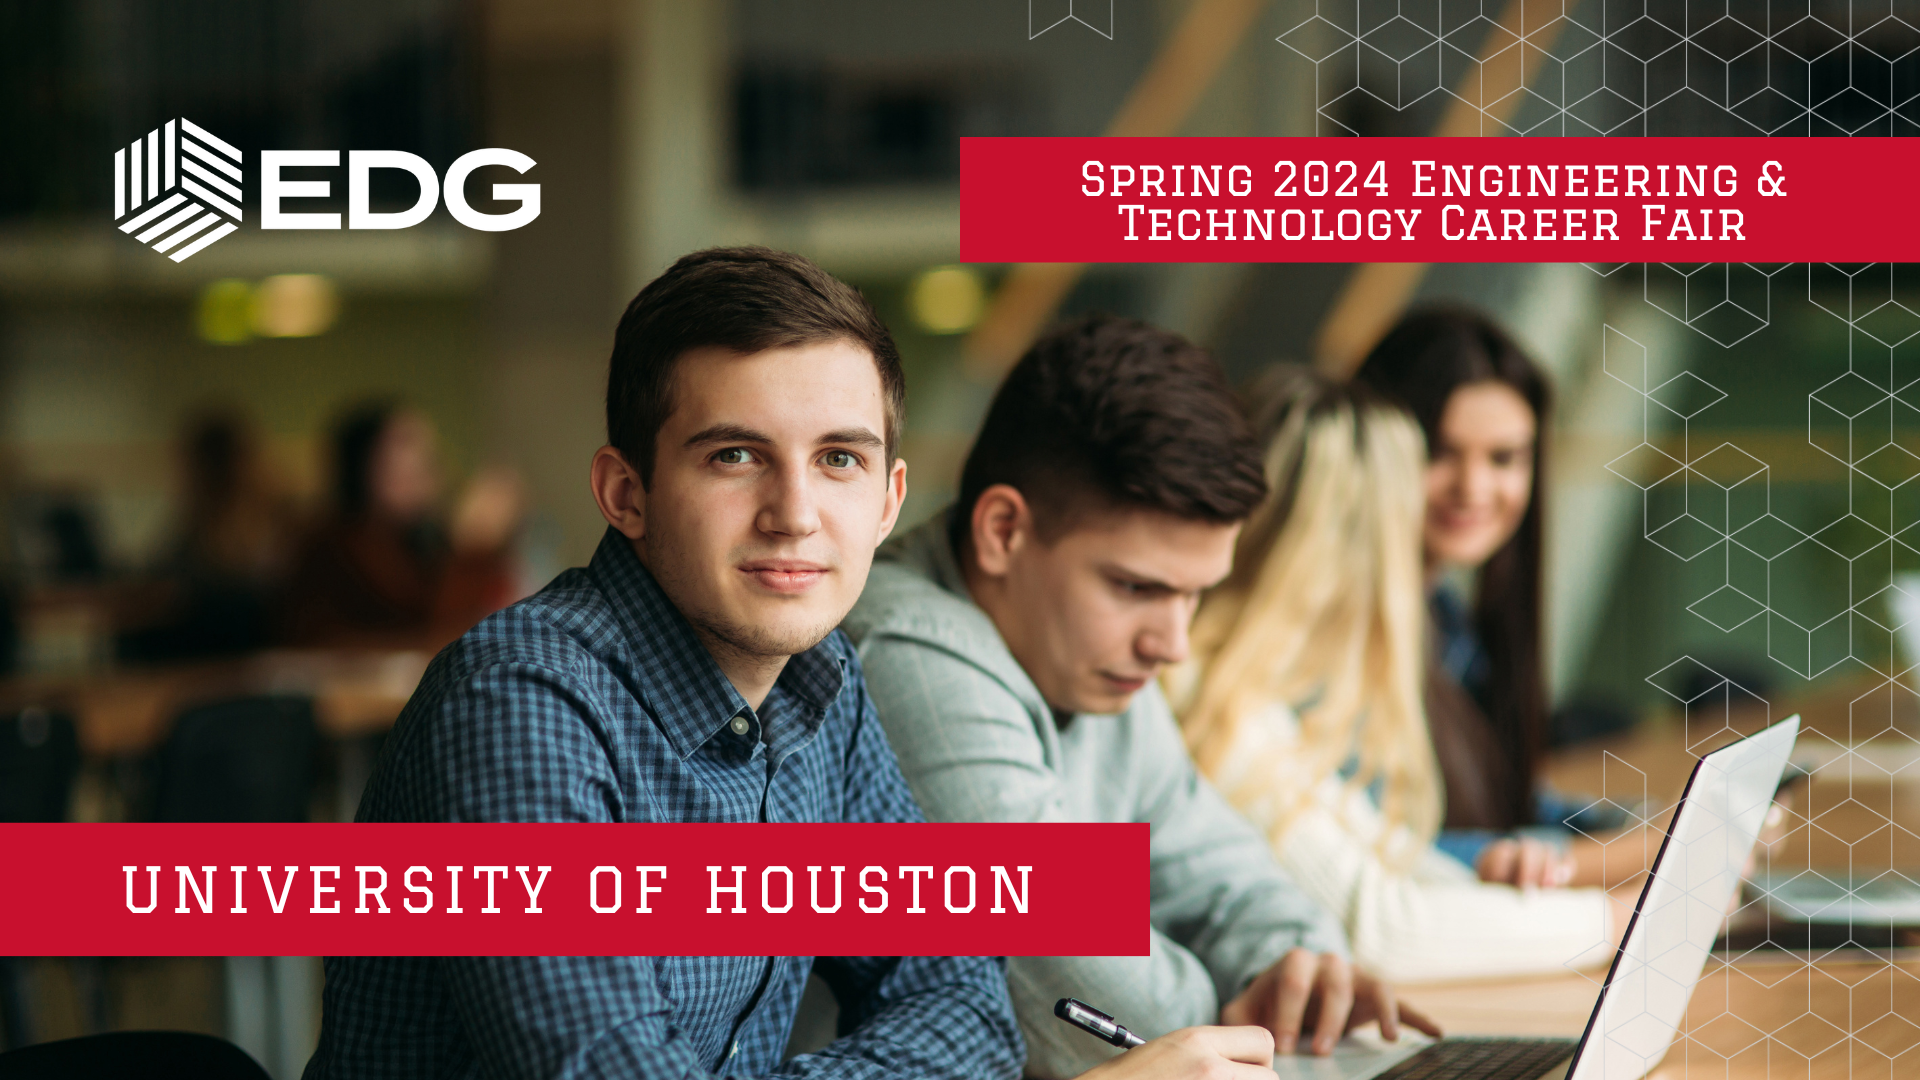 EDG at University of Houston Engineering and Technology Career Fair Spring 2024